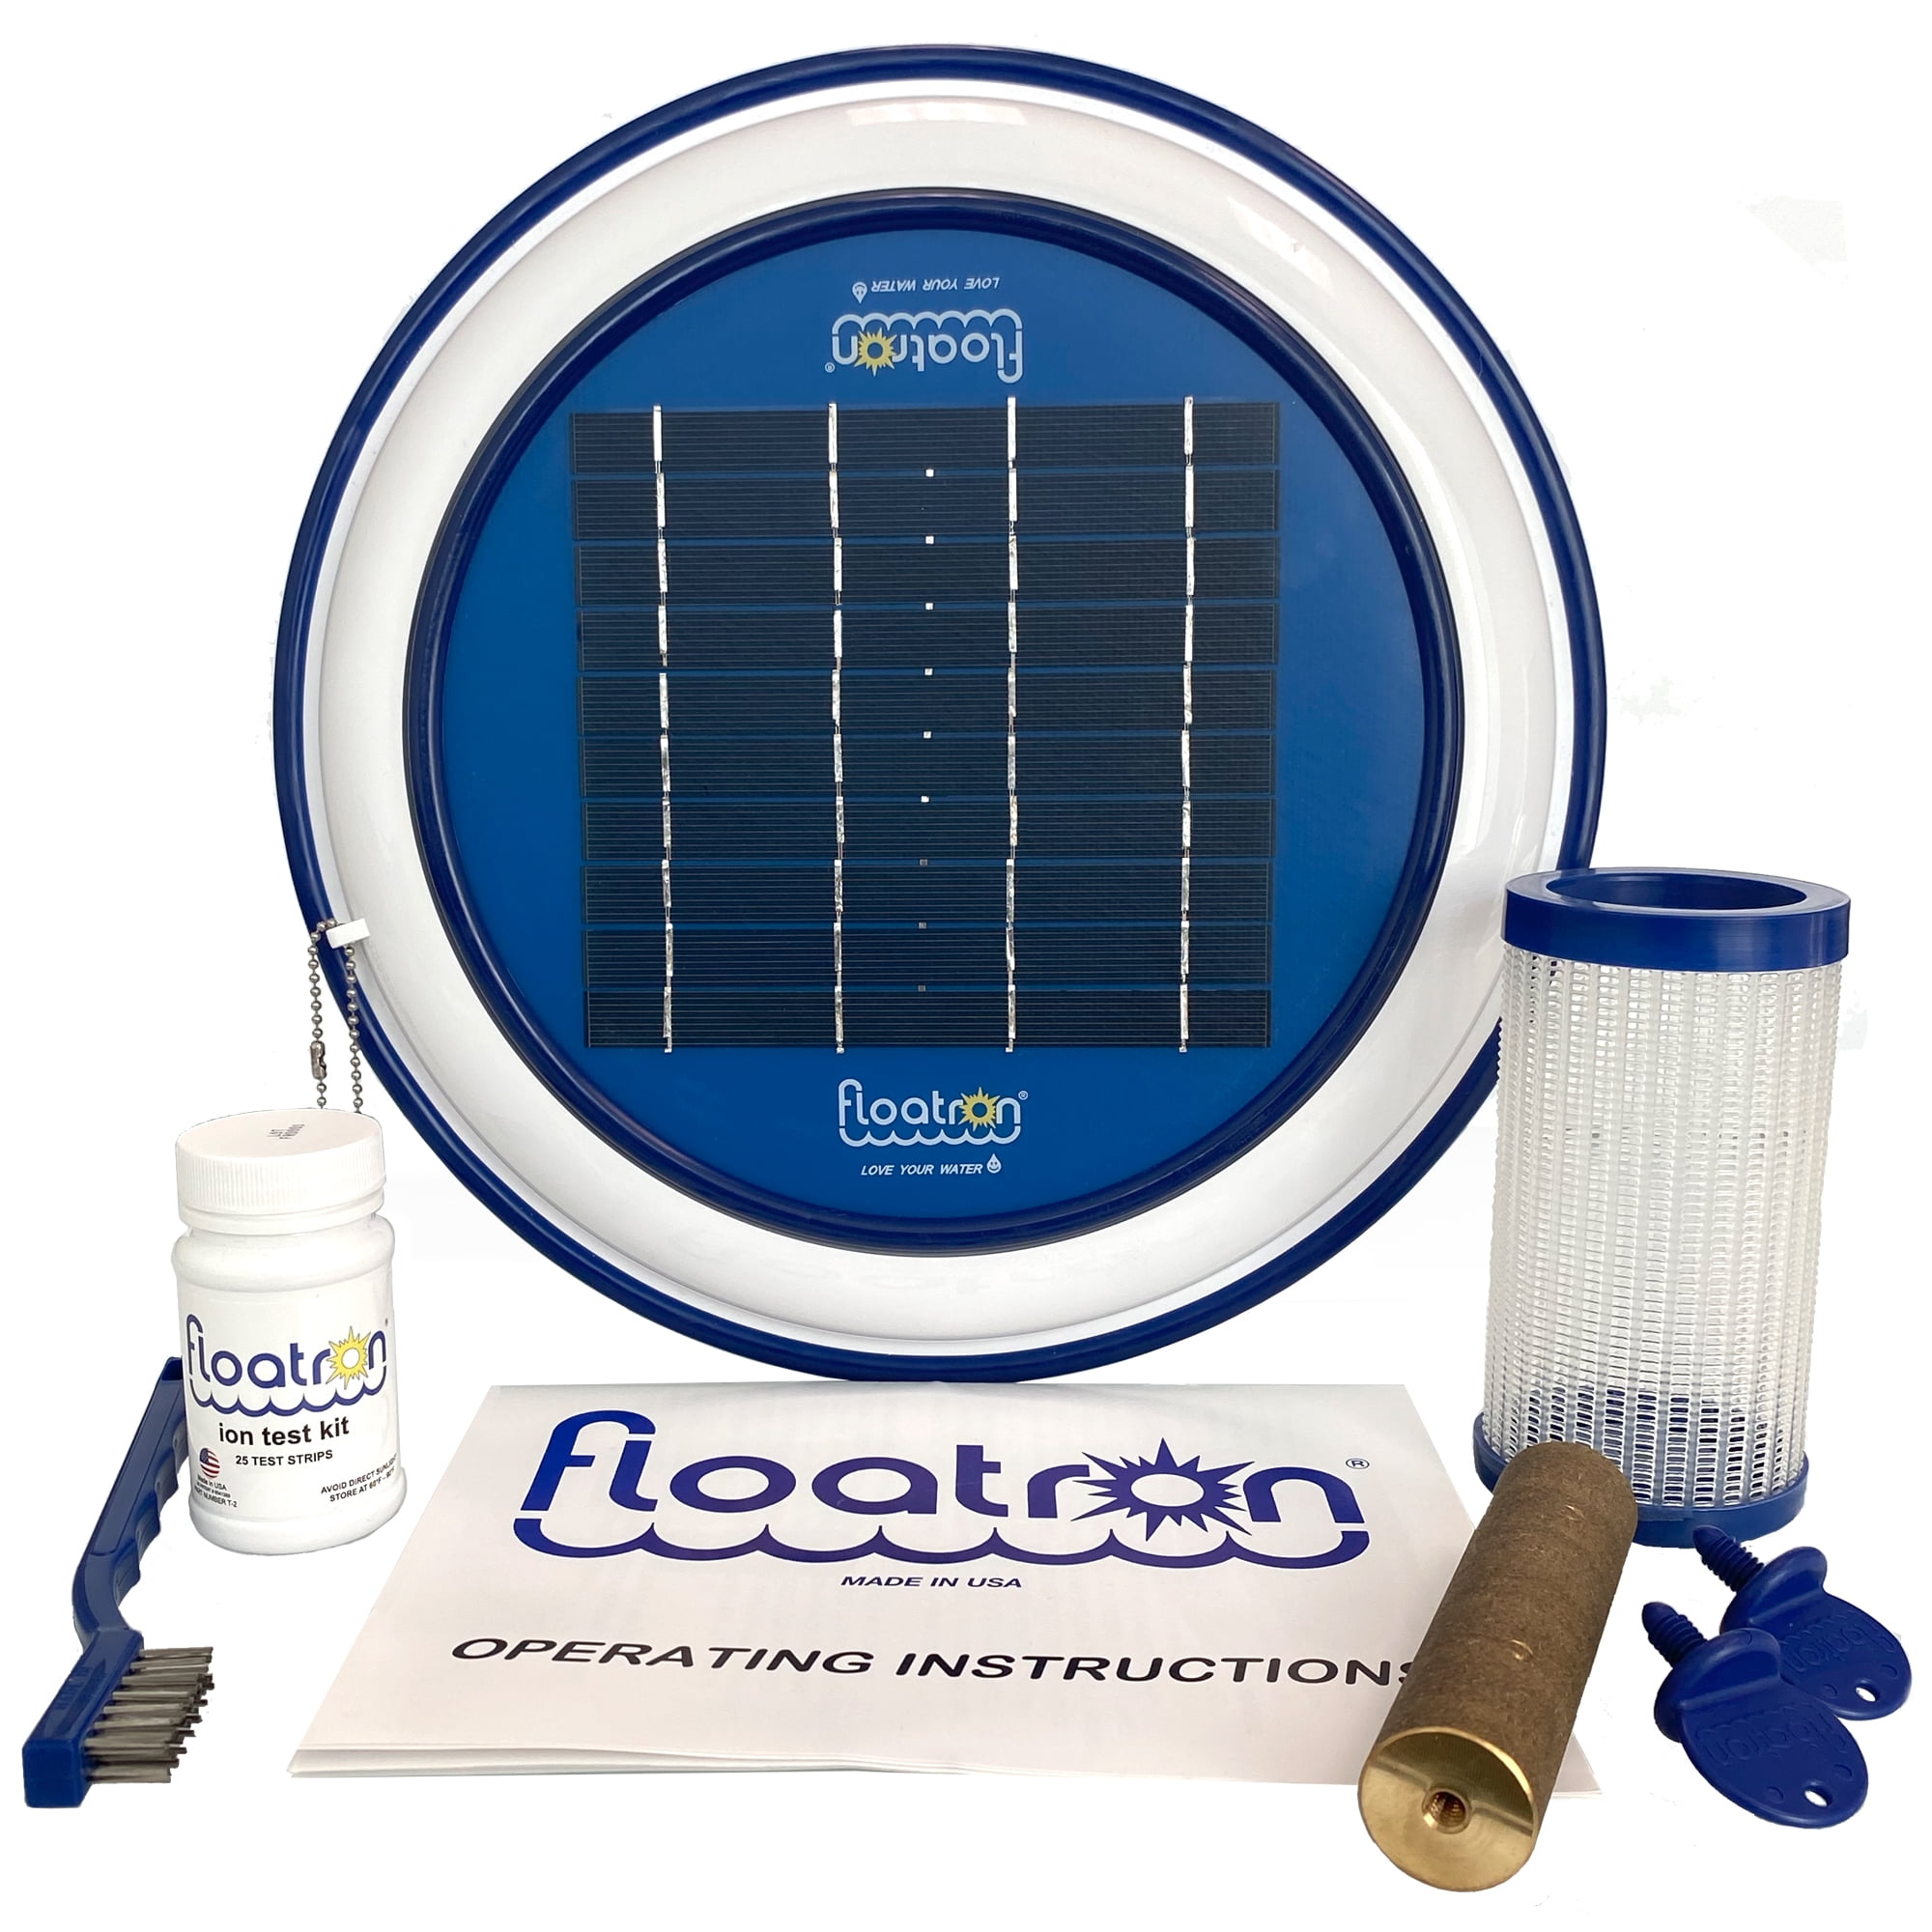 floatron Original Solar Powered Water Purifier/Ionizer - Naturally Mineralized Pool Water